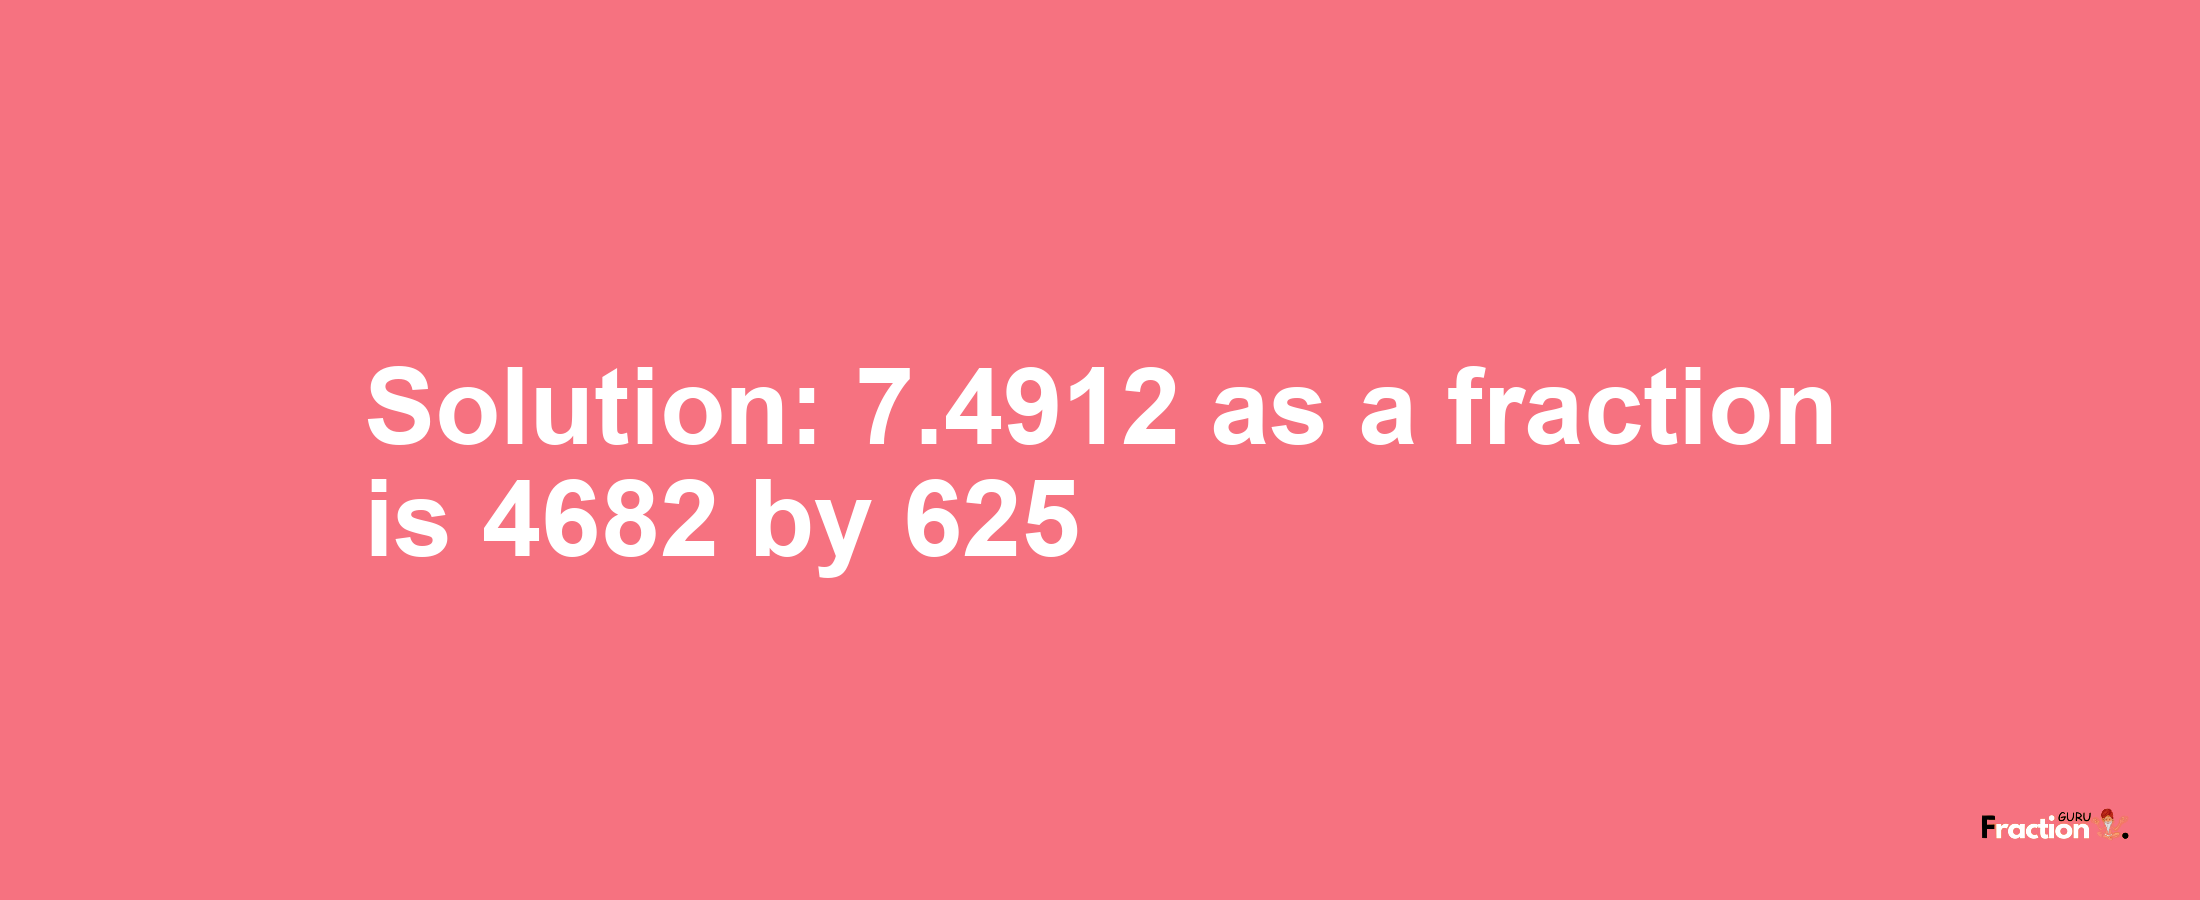 Solution:7.4912 as a fraction is 4682/625